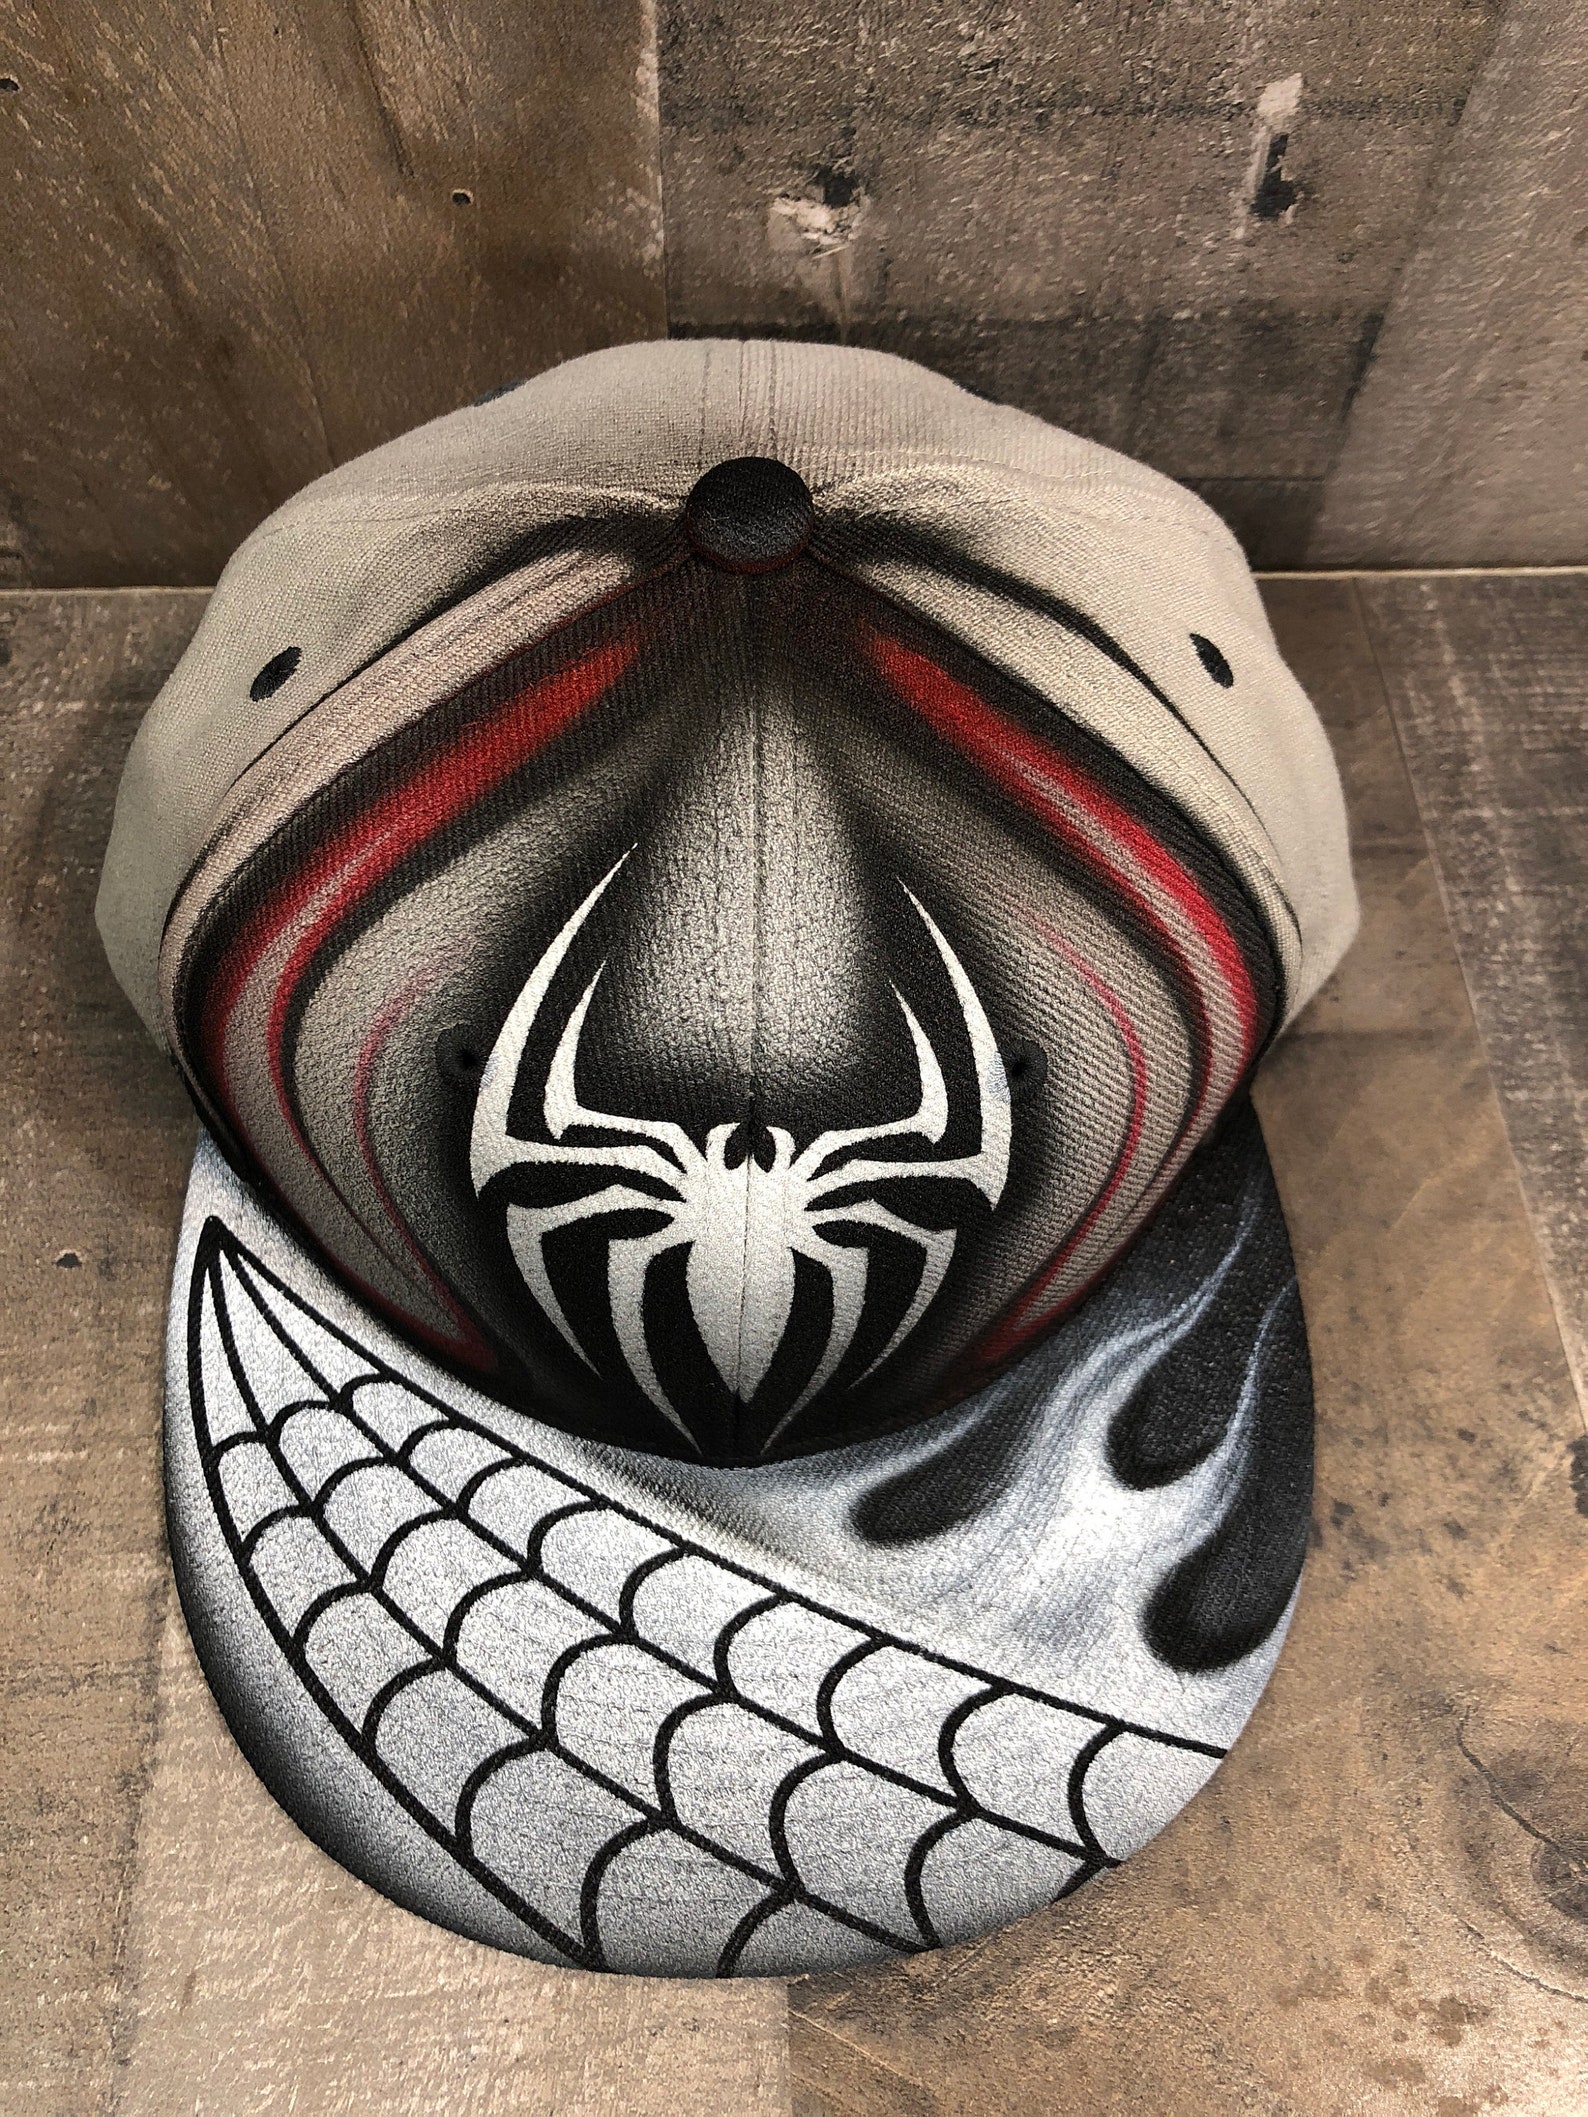 Airbrushed Spiderman Snapback Hat Hand Painted airbrush | Etsy